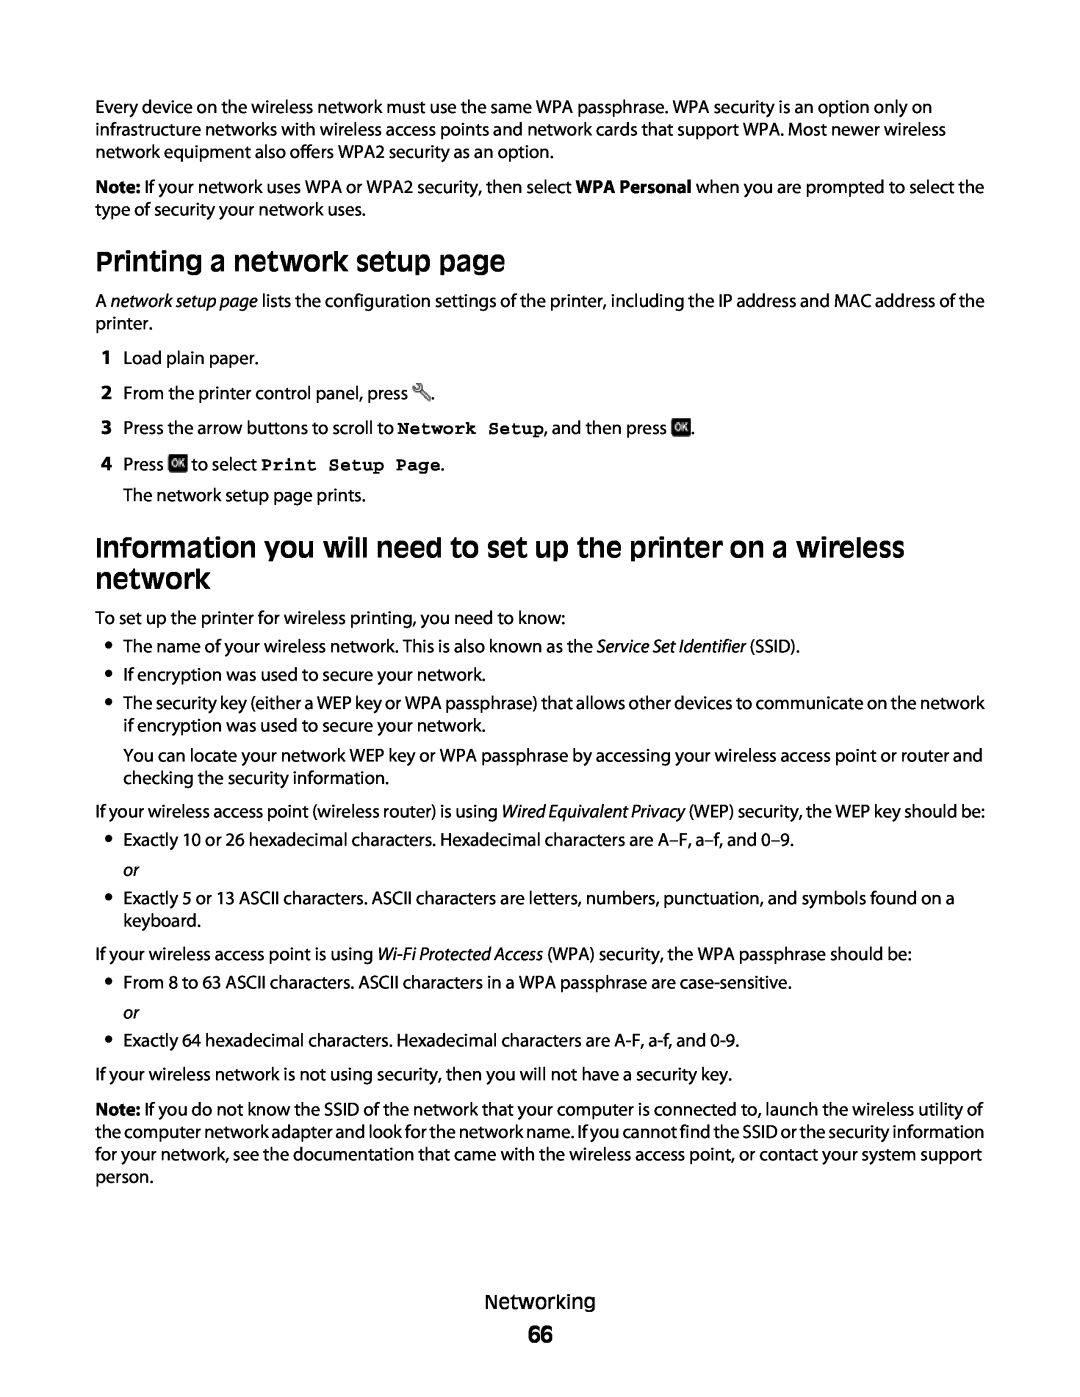 Lexmark S500, 30E, 301 Printing a network setup page, Information you will need to set up the printer on a wireless network 